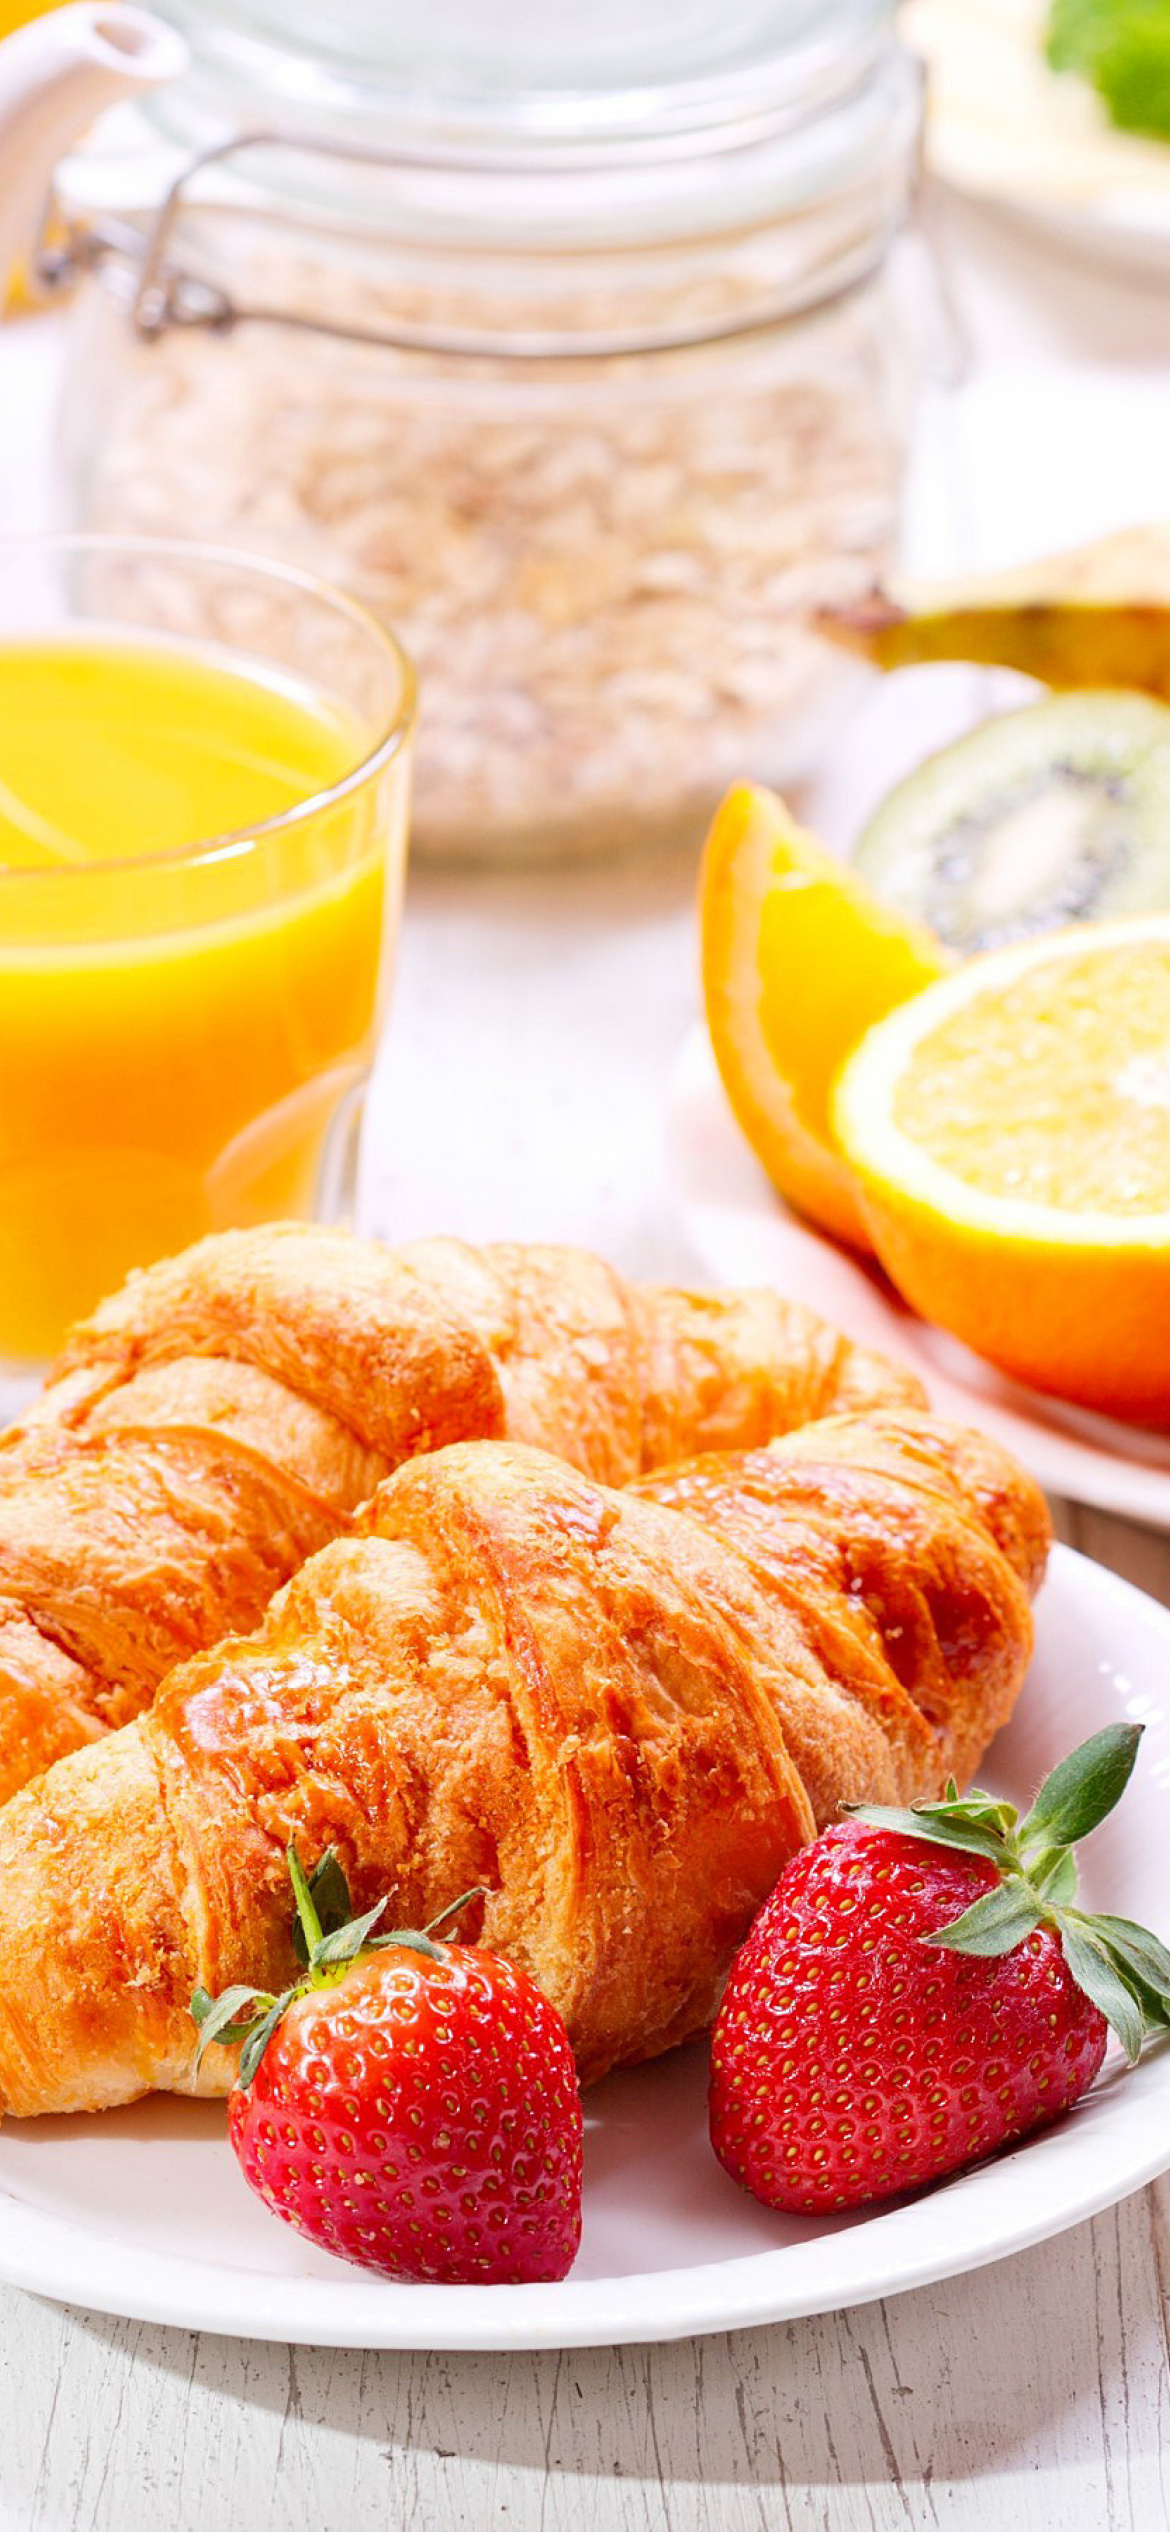 Обои Breakfast with croissants and fruit 1170x2532